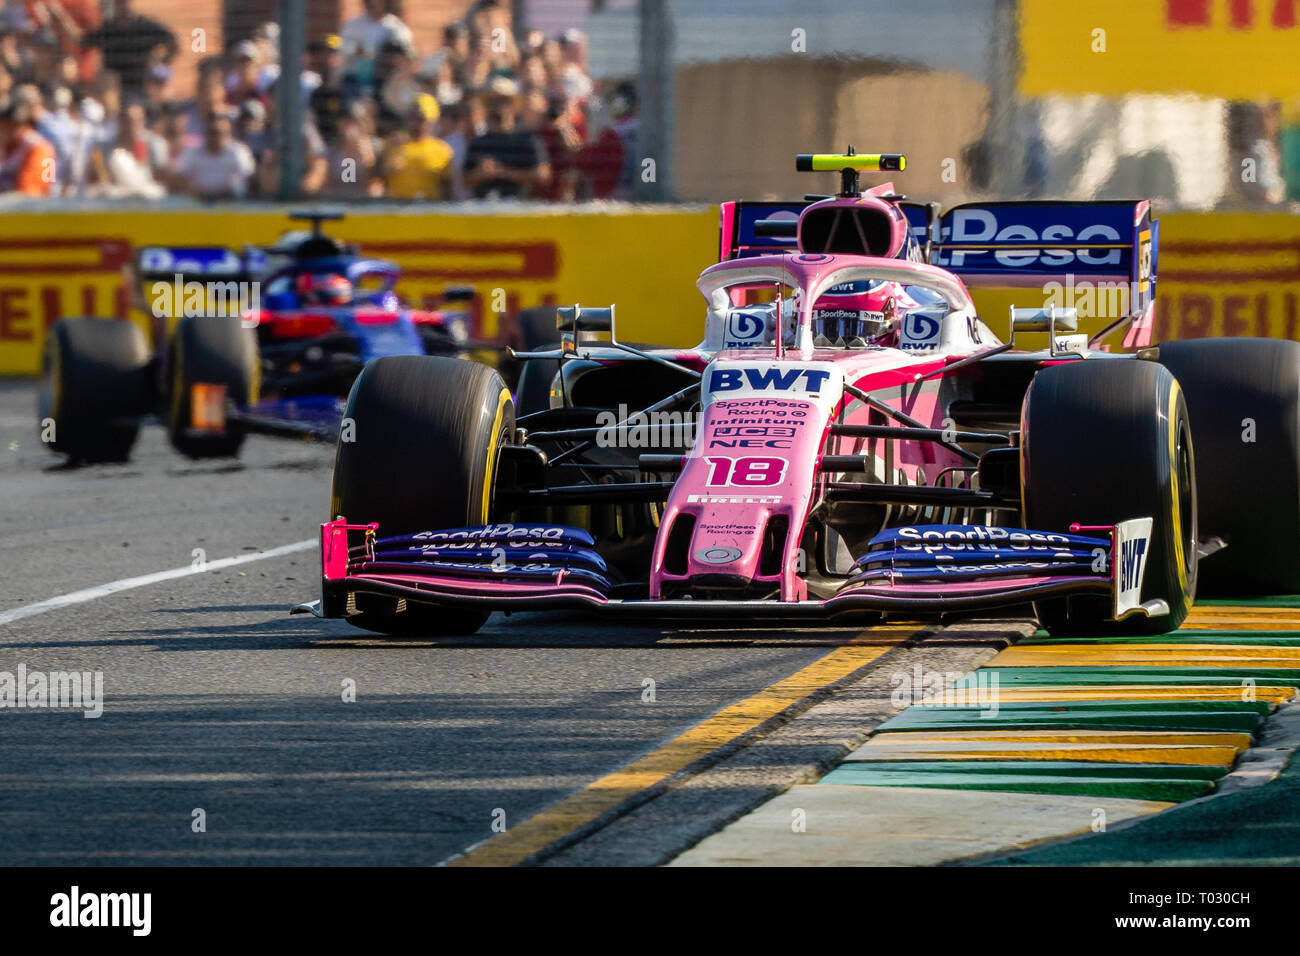 Melbourne, Australia. 17th March 2019.  Lance STROLL 18 driving for SPORTPESA RACING POINT F1 TEAM during the Formula 1 Rolex Australian Grand Prix 2019 at Albert Park Lake, Australia on March 17 2019. Credit: Dave Hewison Sports/Alamy Live News Stock Photo